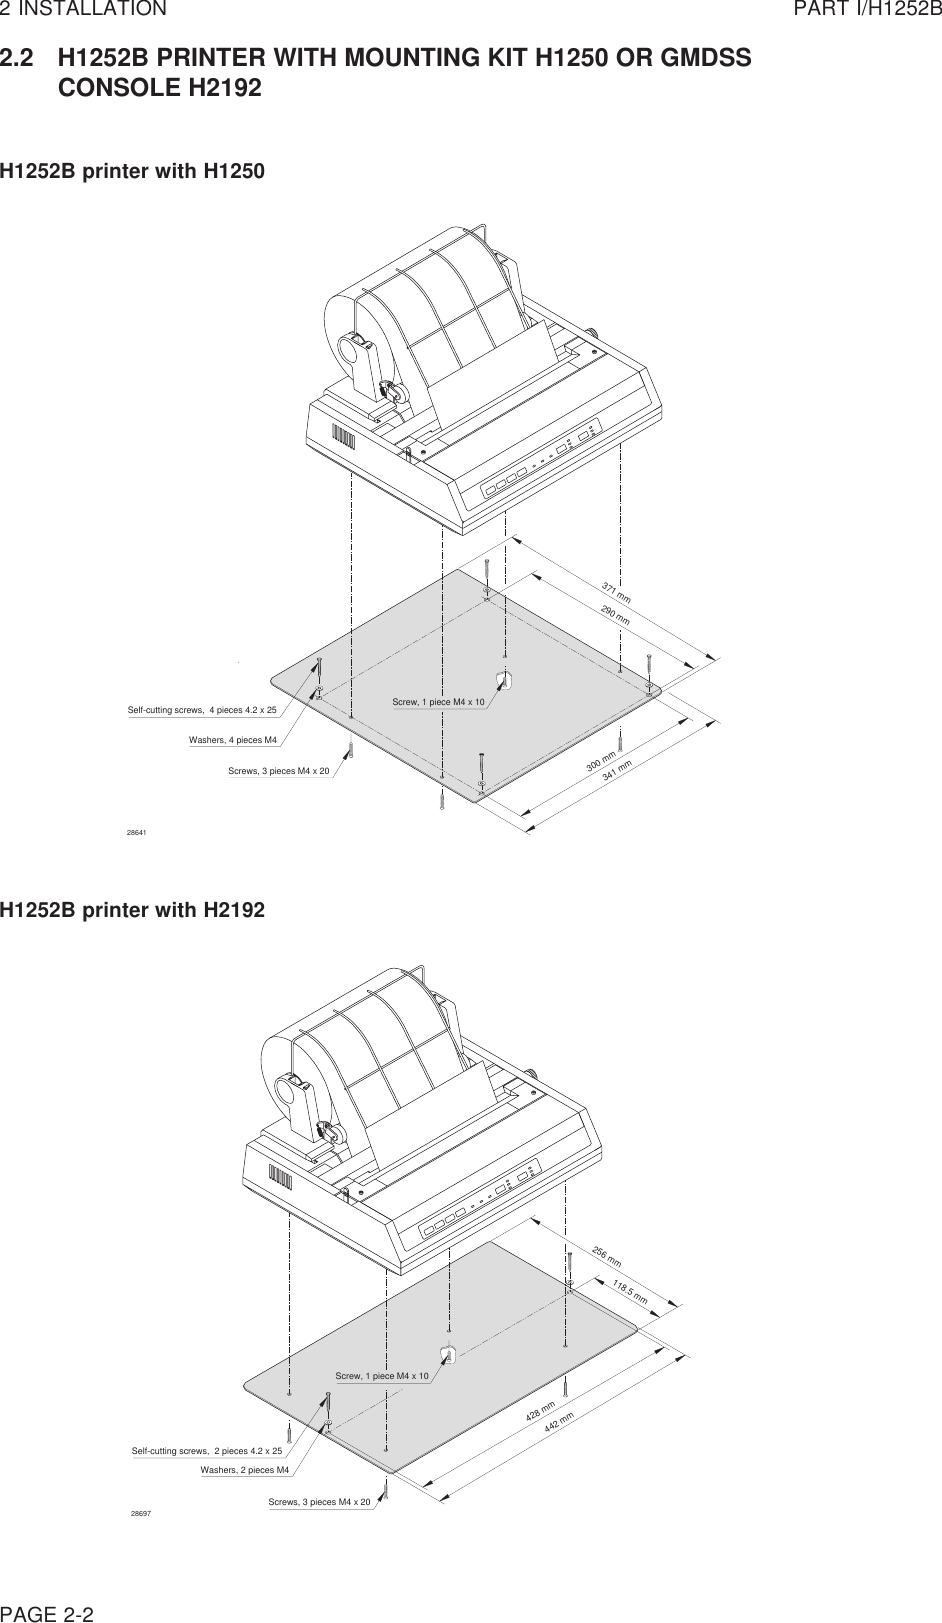 2 INSTALLATION PART I/H1252B2.2 H1252B PRINTER WITH MOUNTING KIT H1250 OR GMDSSCONSOLE H2192H1252B printer with H1250PAGE 2-2H1252B printer with H219228697Screw, 1 piece M4 x 10Washers, 2 pieces M4Self-cutting screws,  2 pieces 4.2 x 25Screws, 3 pieces M4 x 20428 mm442 mm118.5 mm256 mm28641Self-cutting screws,  4 pieces 4.2 x 25Screws, 3 pieces M4 x 20Washers, 4 pieces M4Screw, 1 piece M4 x 10300 mm341 mm290 mm371 mm